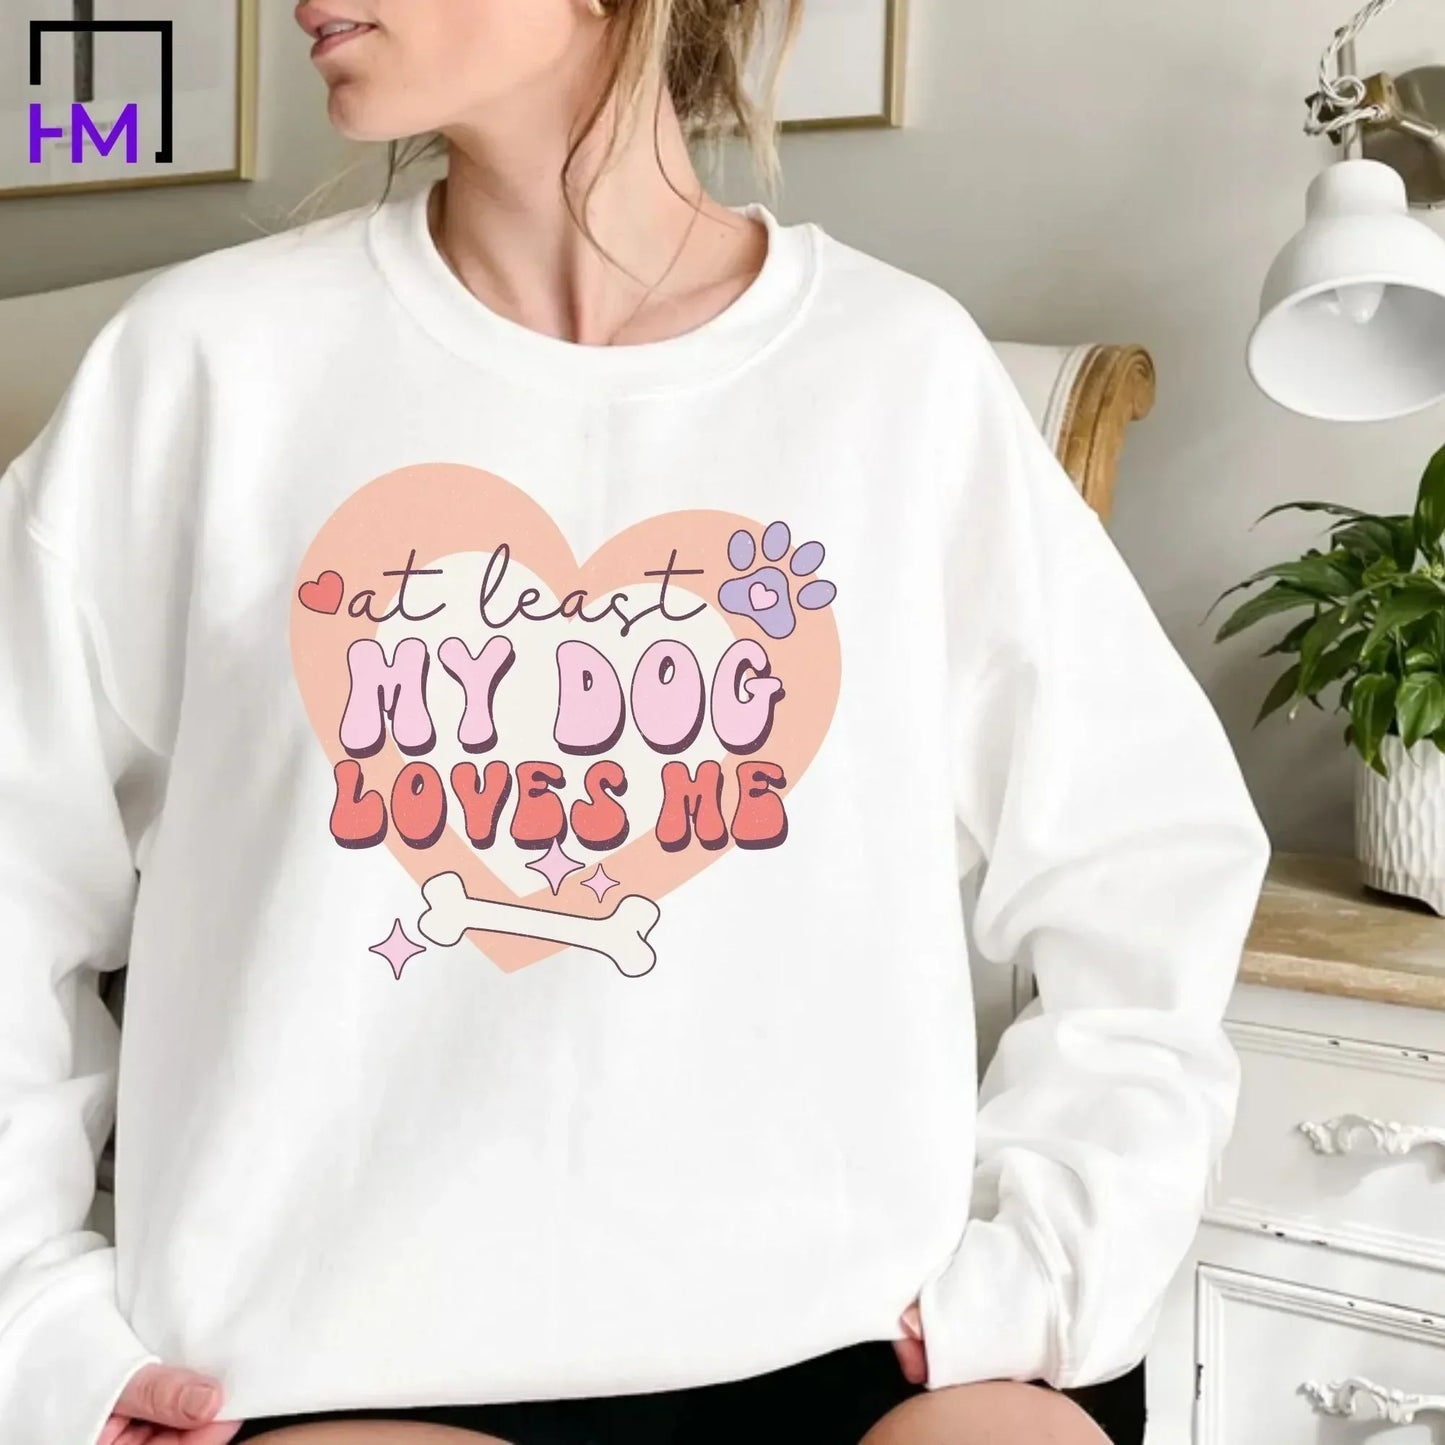 At Least My Dog Loves Me, Funny Valentine's Day Shirt, Bestie Valentine's Gift for Her, Love Shirts for Women, Cute V-Day Shirt, Proud to Be Single, Self Love Shirt